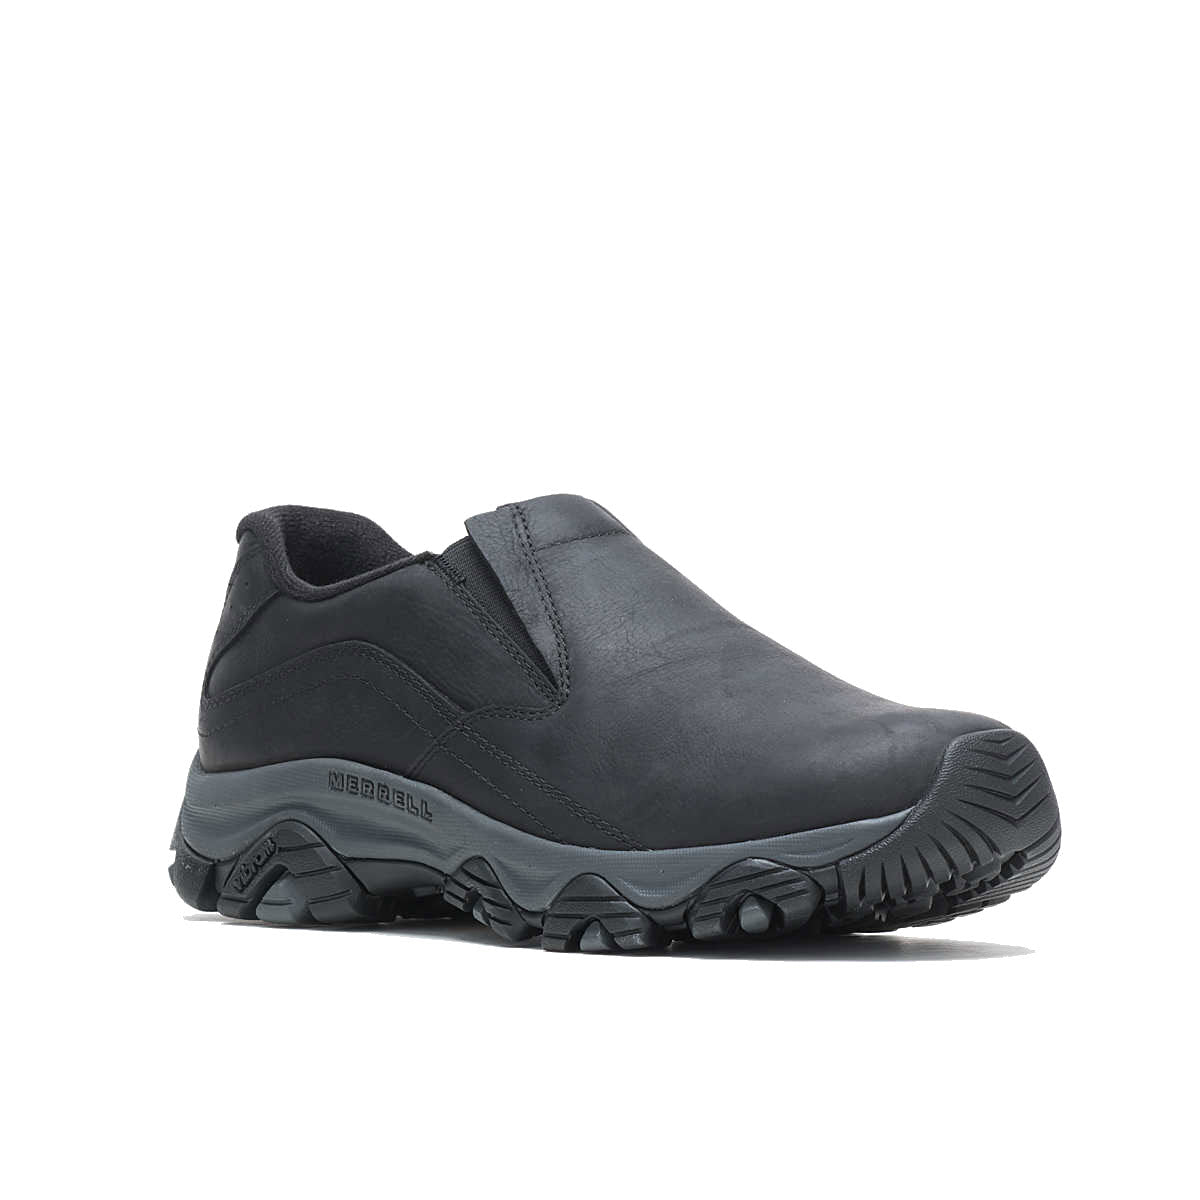 Merrell Moab Adventure 3 Moc black leather slip-on casual shoe, featured on a white background.